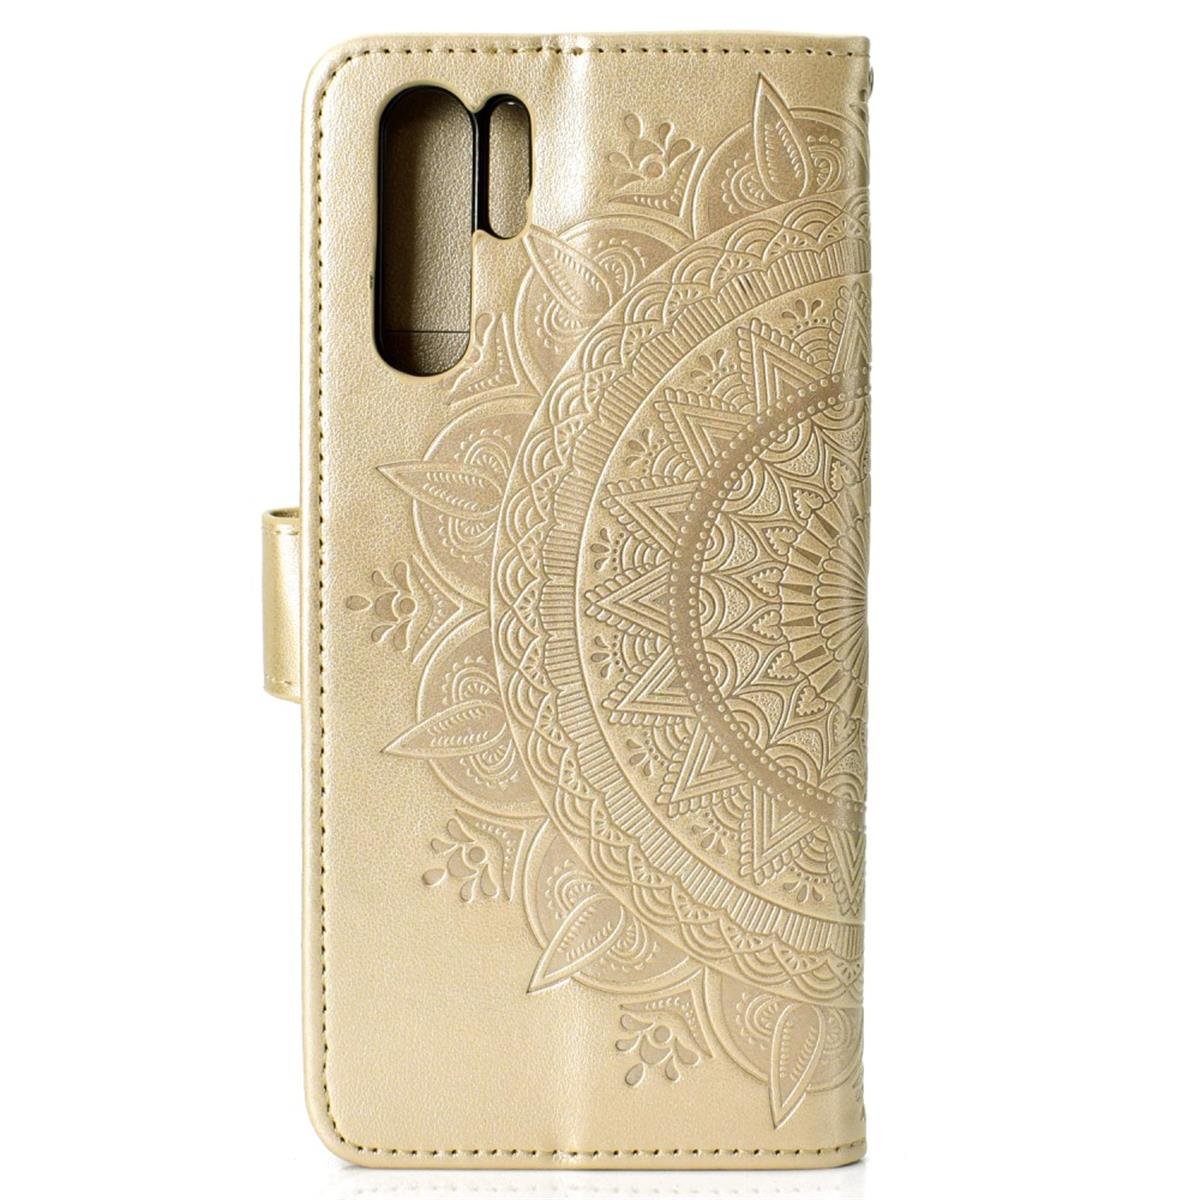 COVERKINGZ Klapphülle mit Mandala Bookcover, Gold Pro, P30 Huawei, Muster